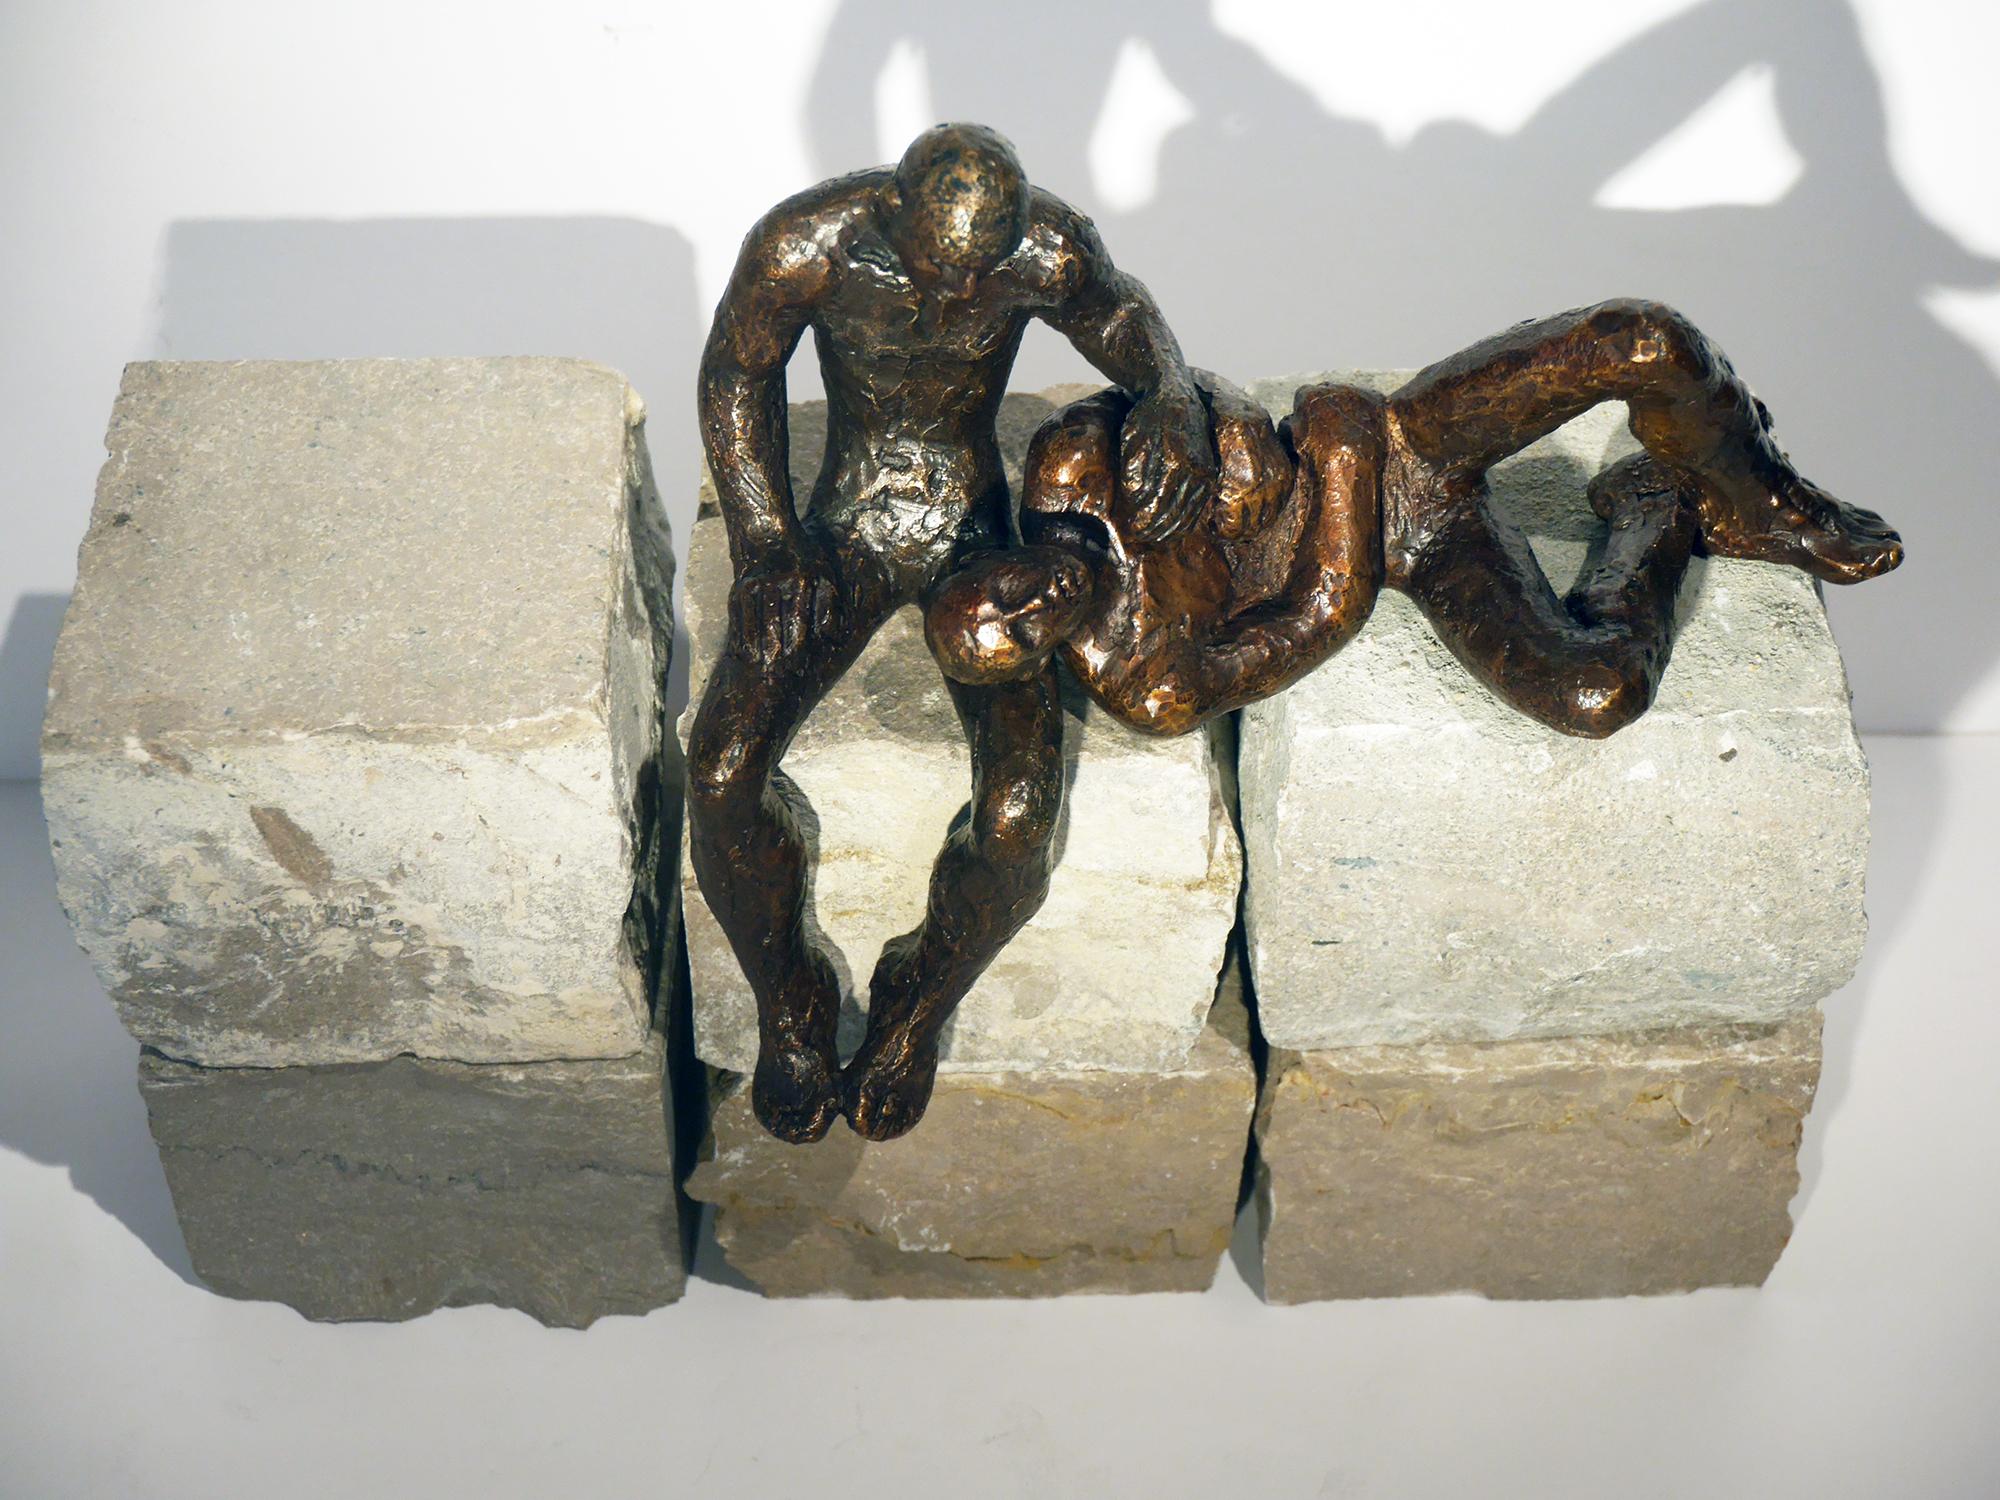 Tendresse, figurative bronze sculpture, evocation of tenderness between two men - Contemporary Sculpture by Maguy Banq